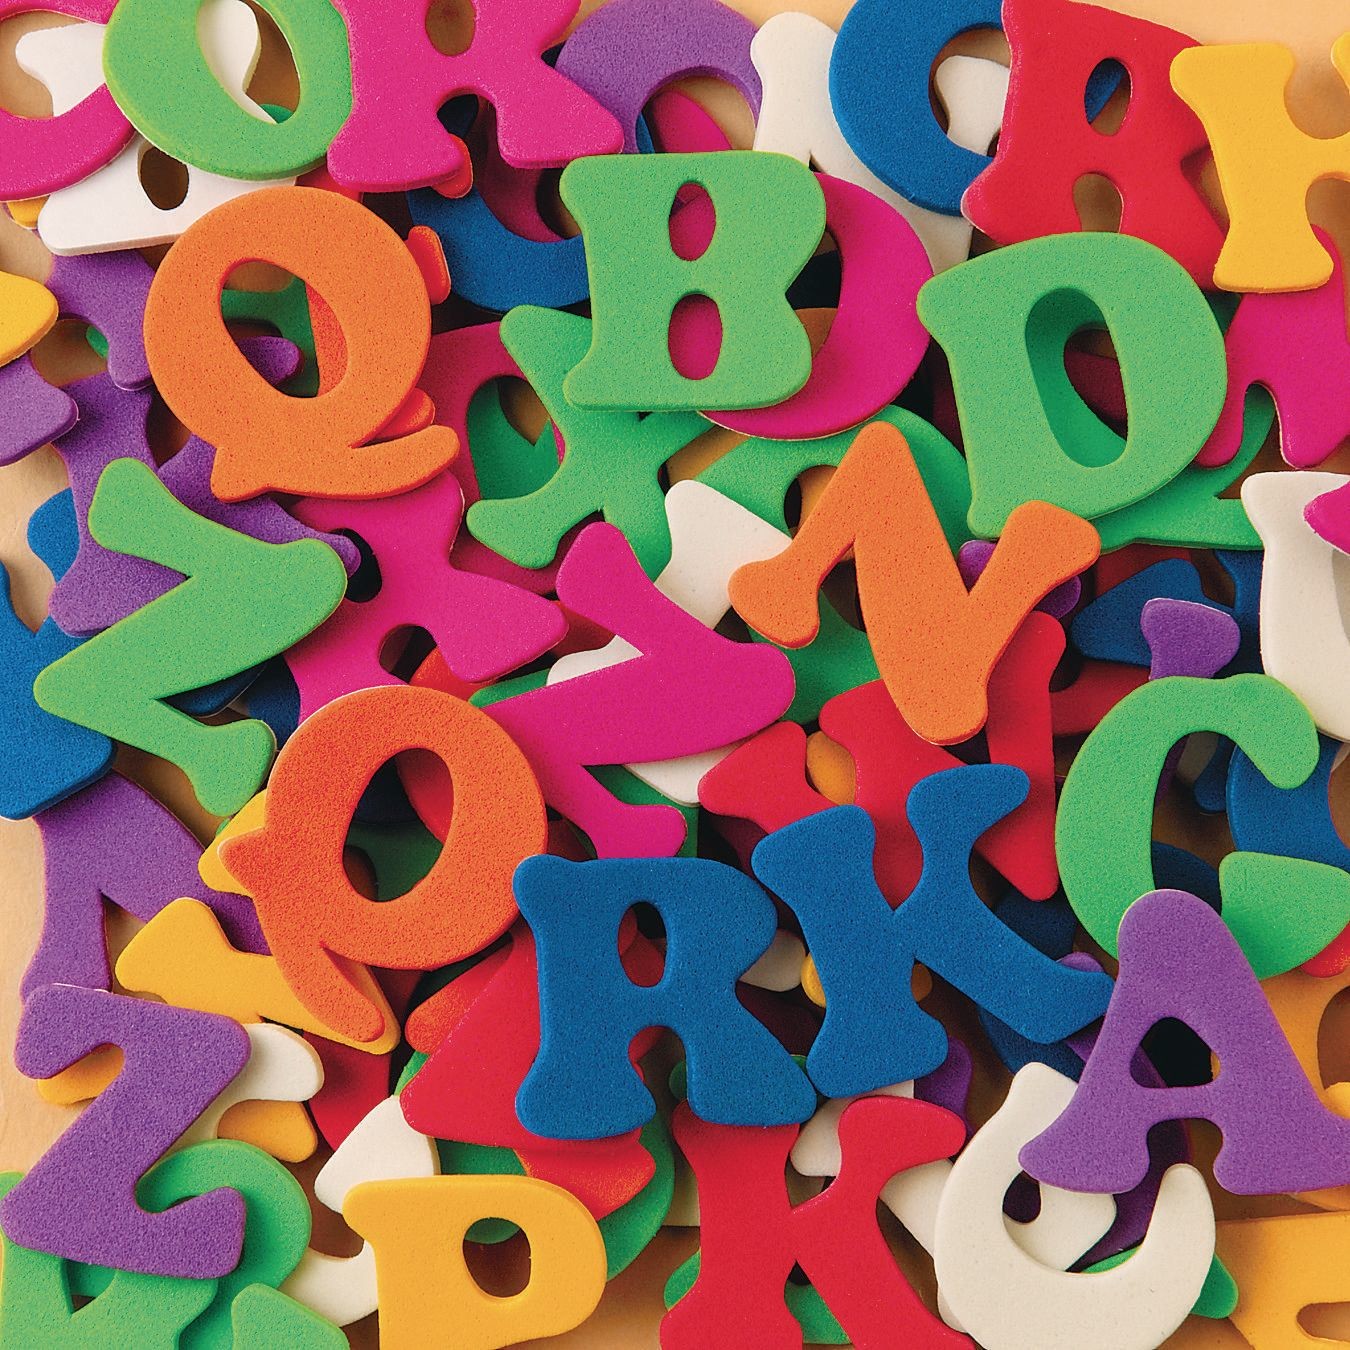 Color Splash! Foam Letter Shapes with Adhesive - ABCs, Size: One Size